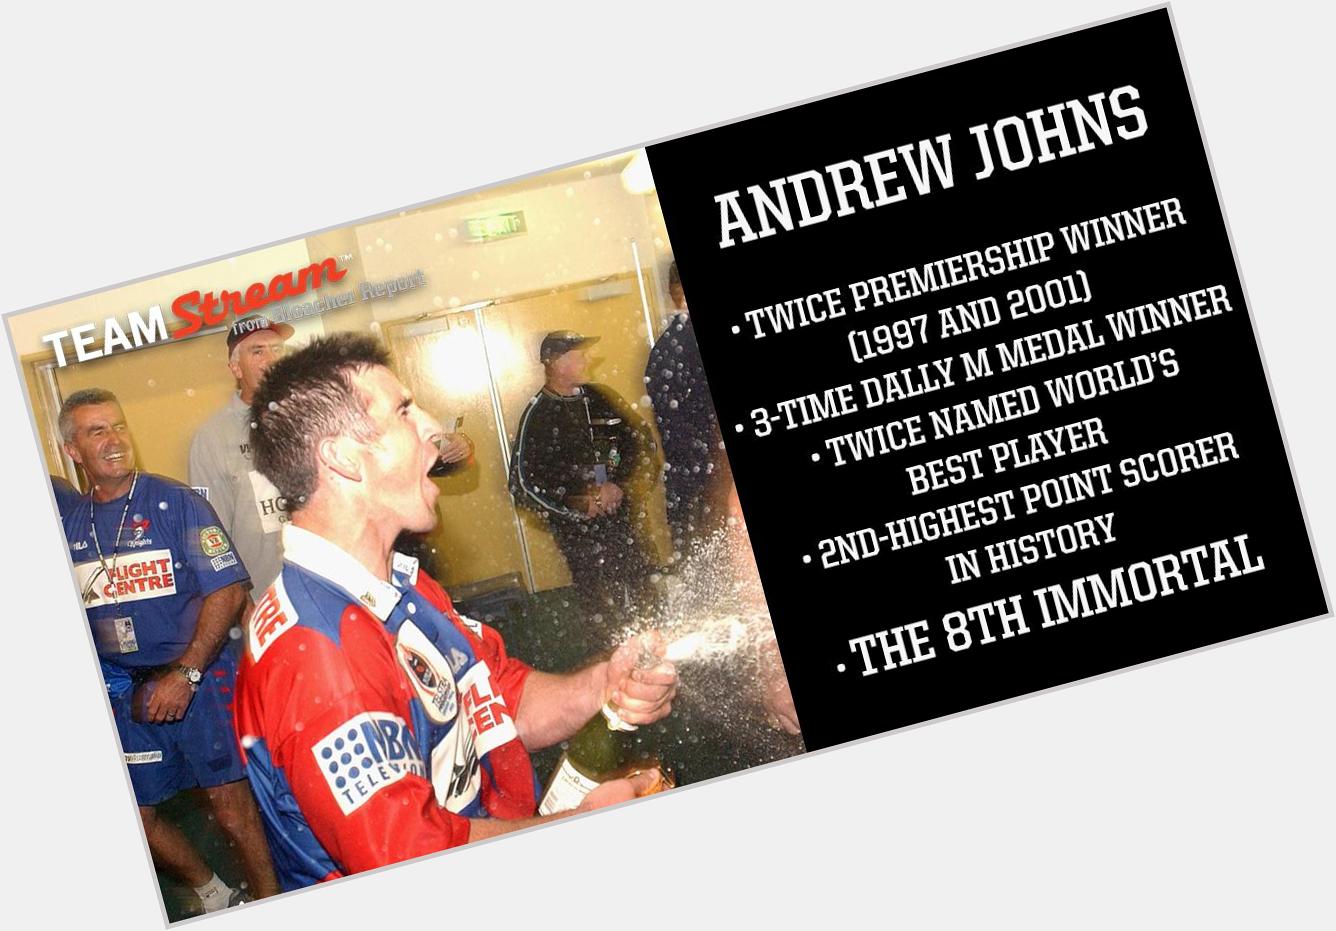 Happy 41st birthday to and legend Andrew Johns 